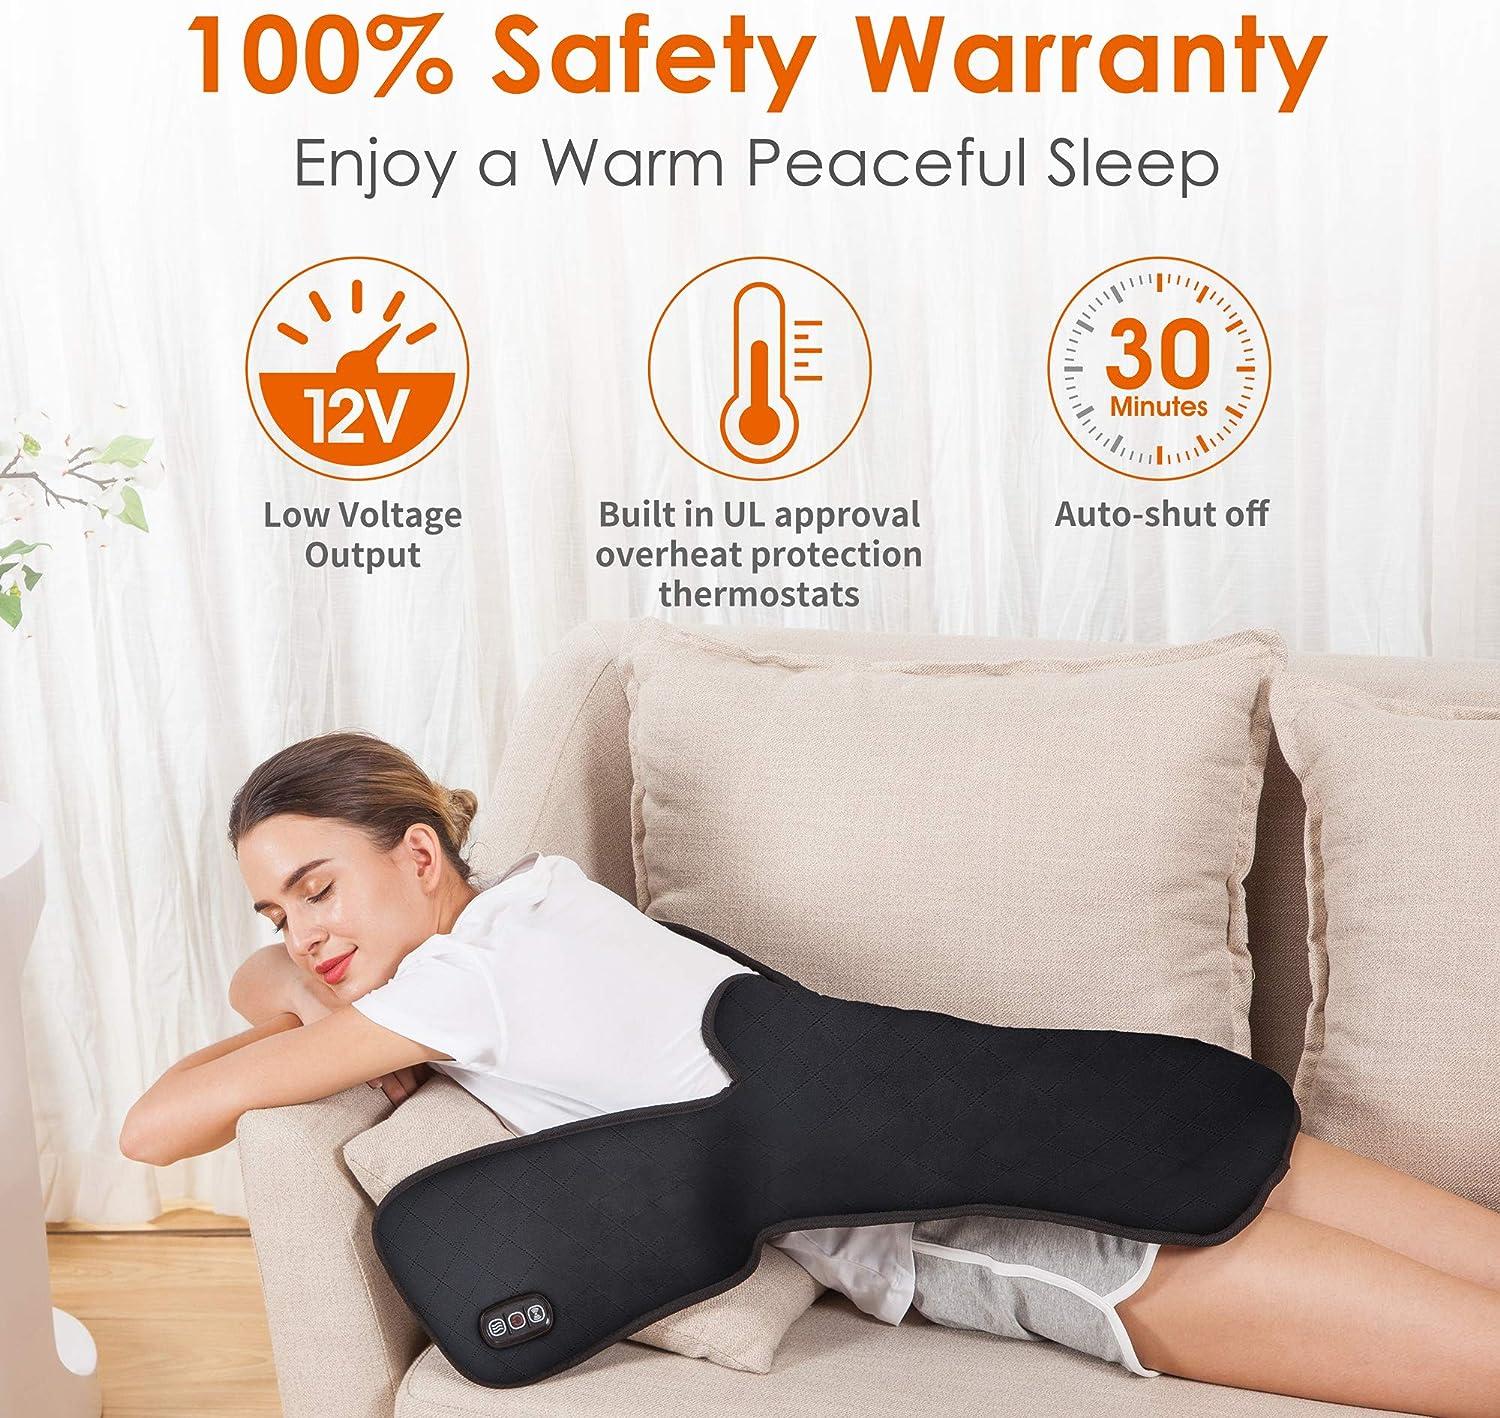 Heated Shoulder Brace Wrap for Pain Relief,Eletric Shoulder Heating Pad,Shoulder Massager with 3 Adjustable Vibrations and Heating Modes, Size: 8.27 x